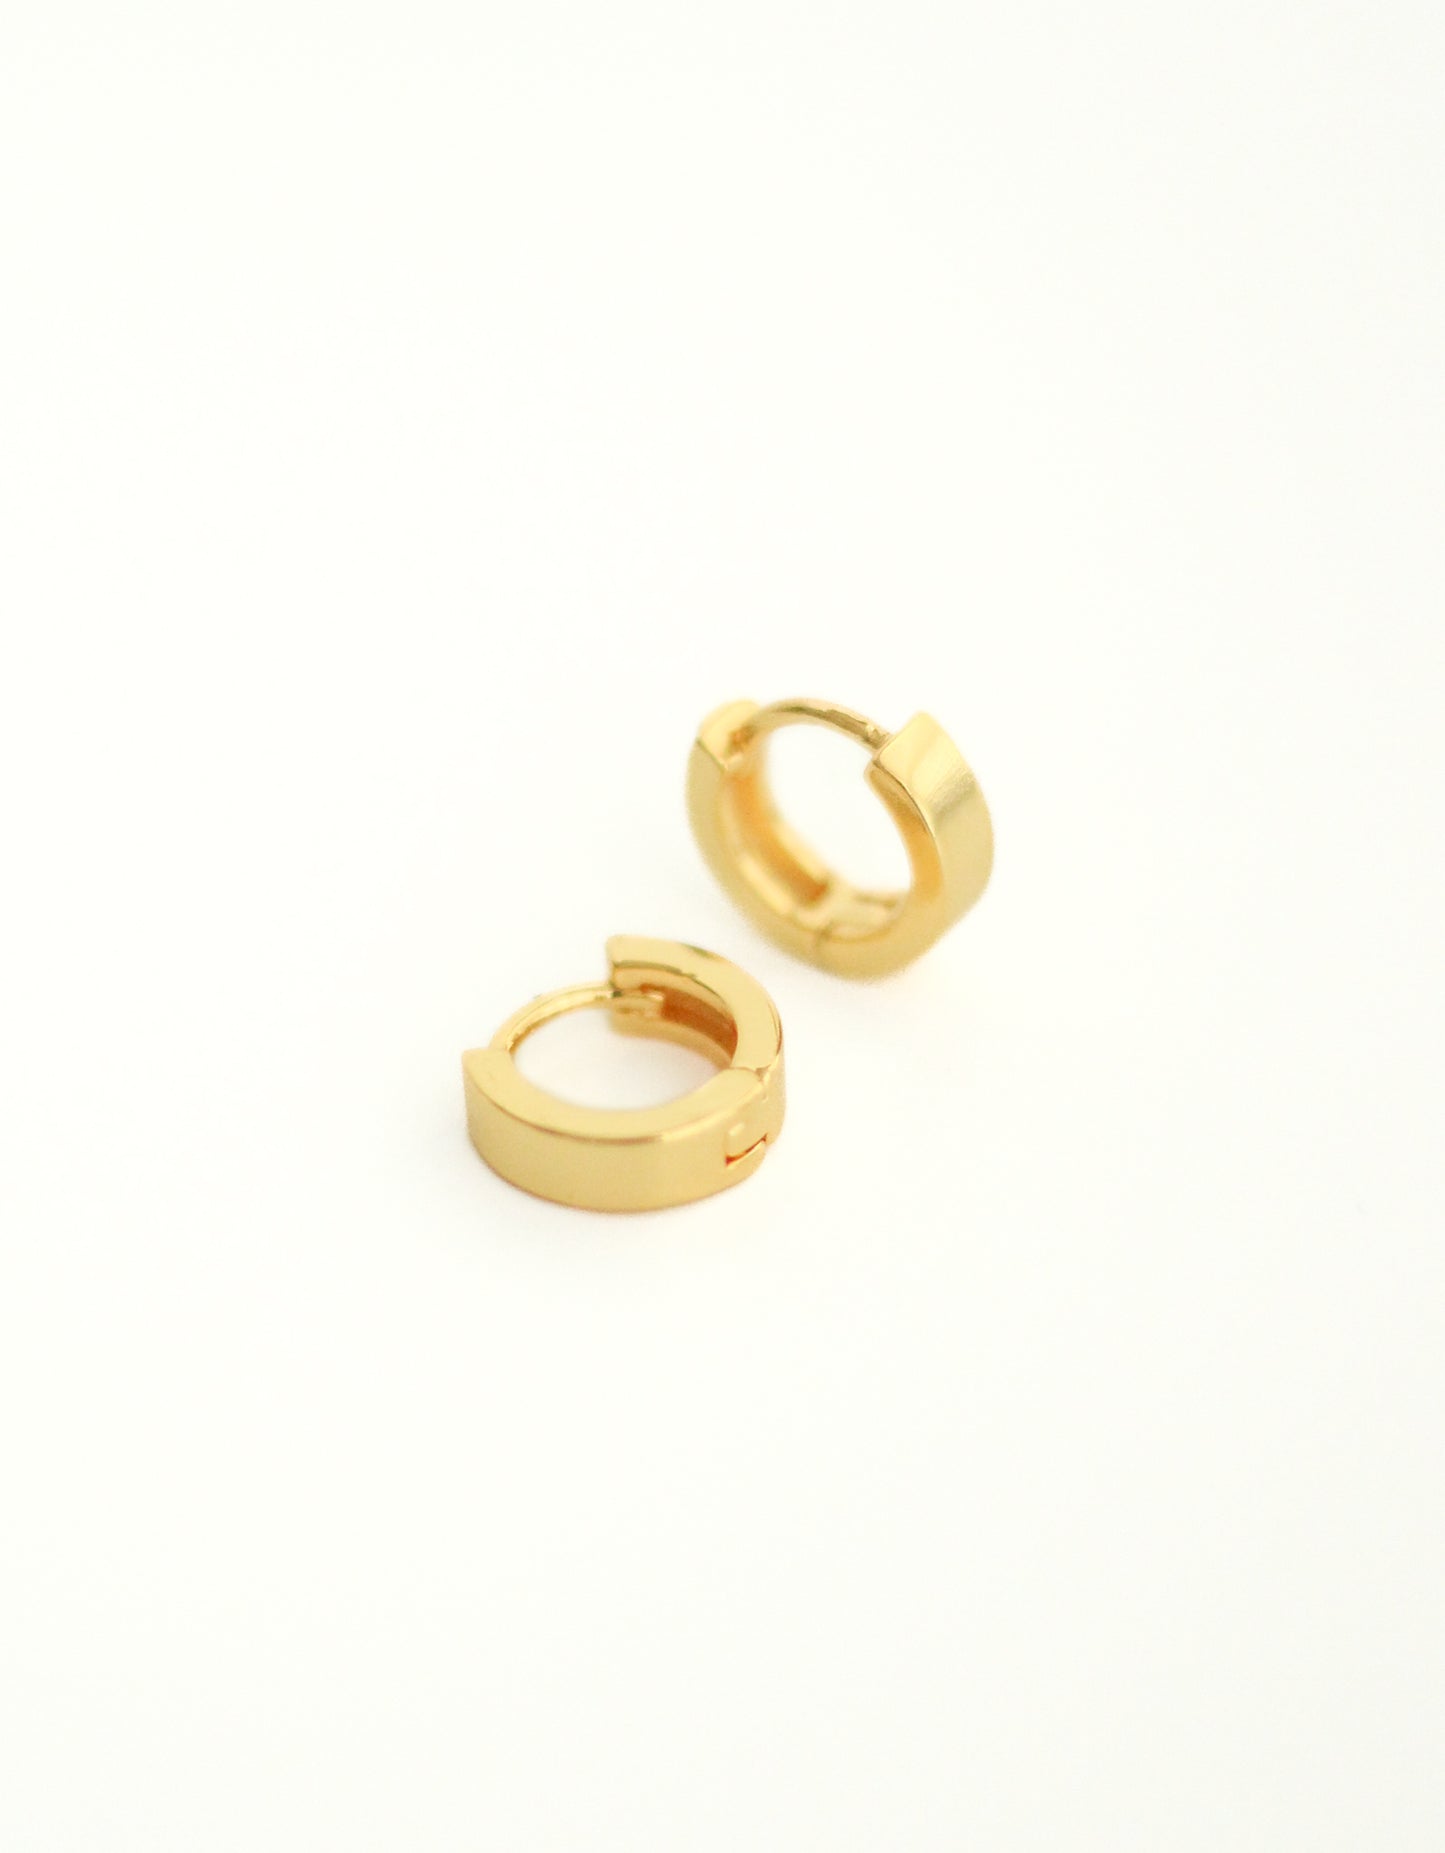 18K Gold plated Small Flat Hoop Huggie Earrings at Kadou Boutique.